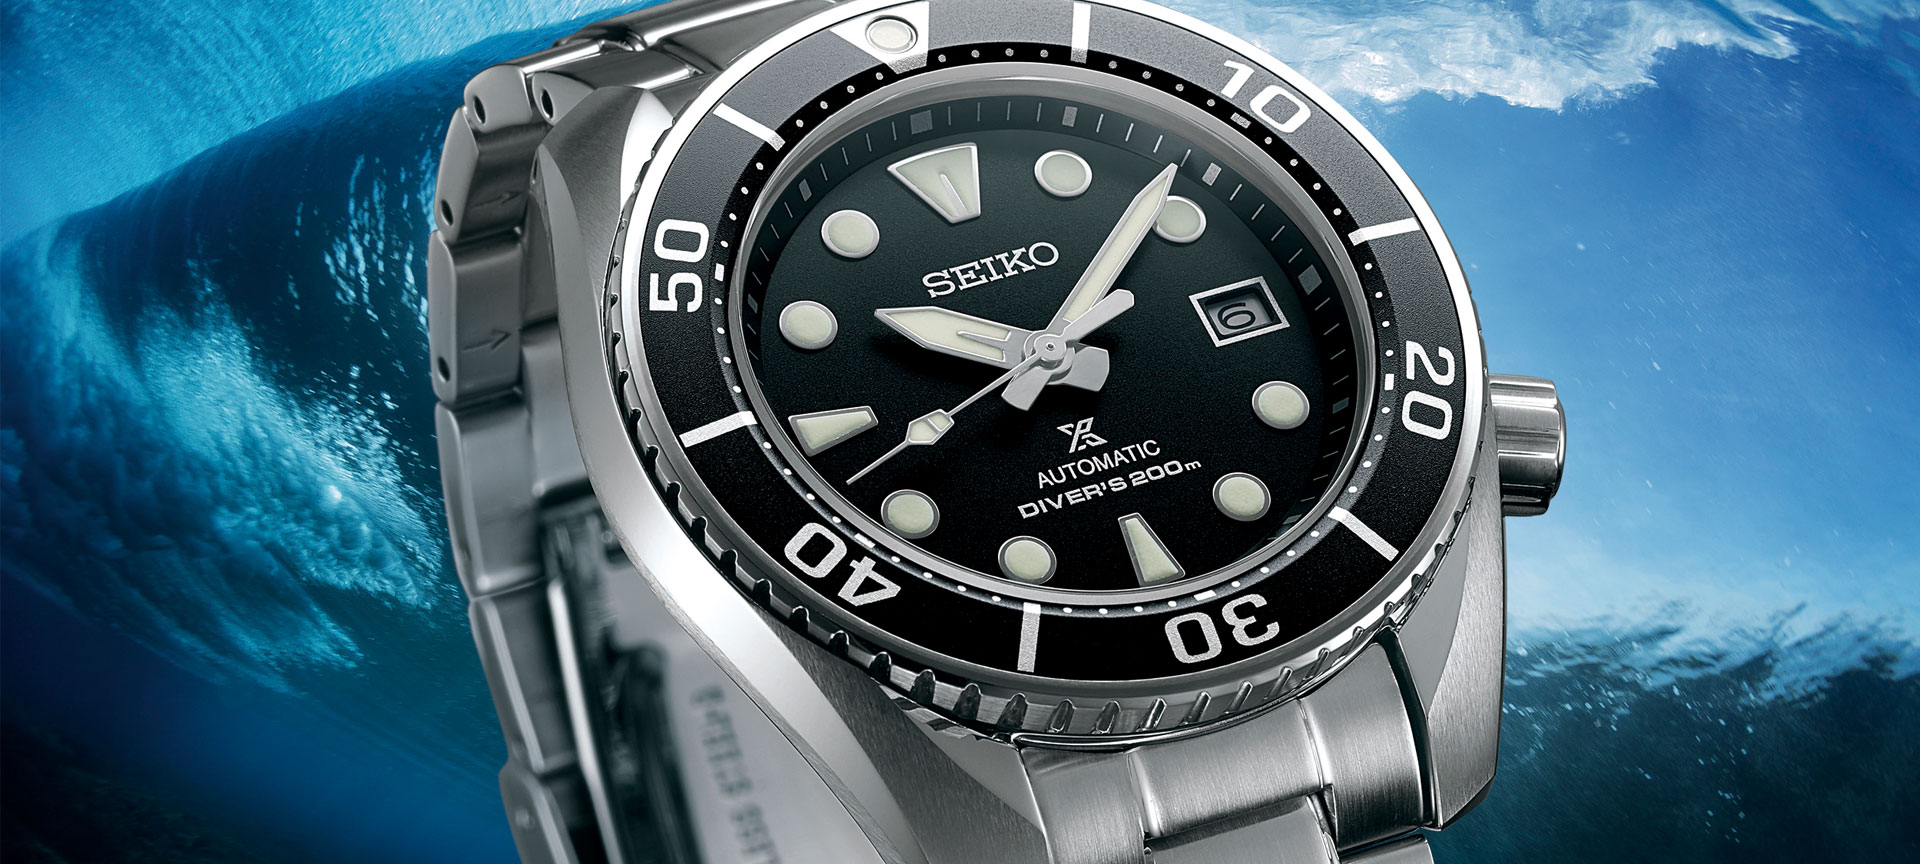 The New Seiko Prospex is Everything You Need in a Watch